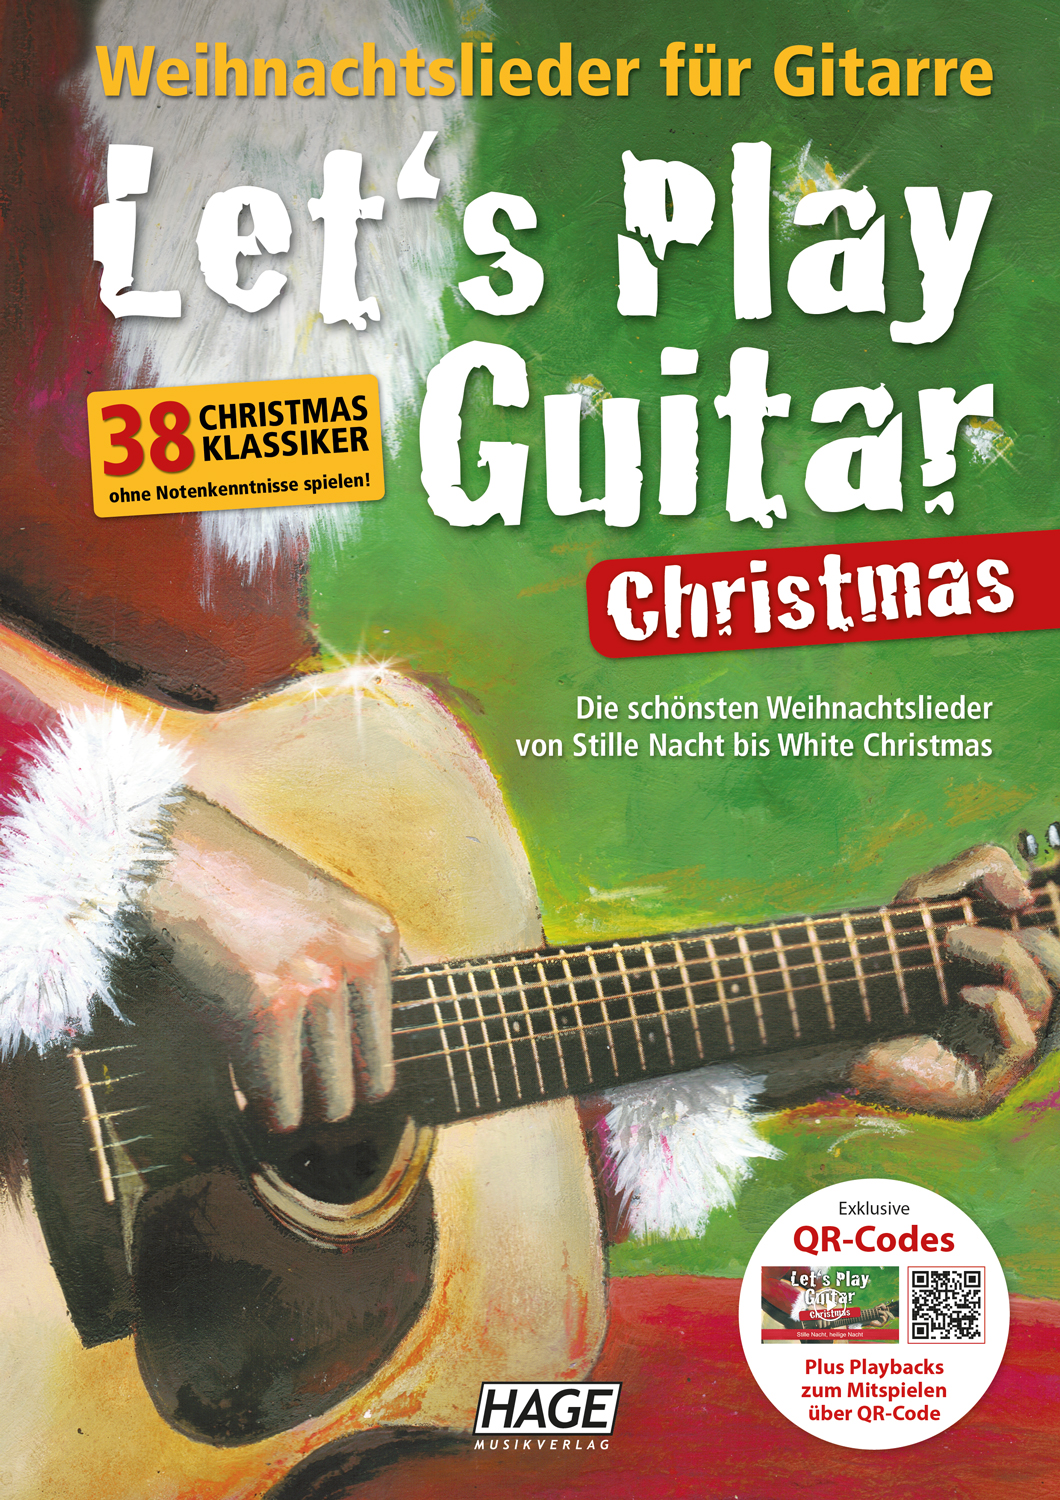 Let's Play Guitar Christmas (with QR-Codes)